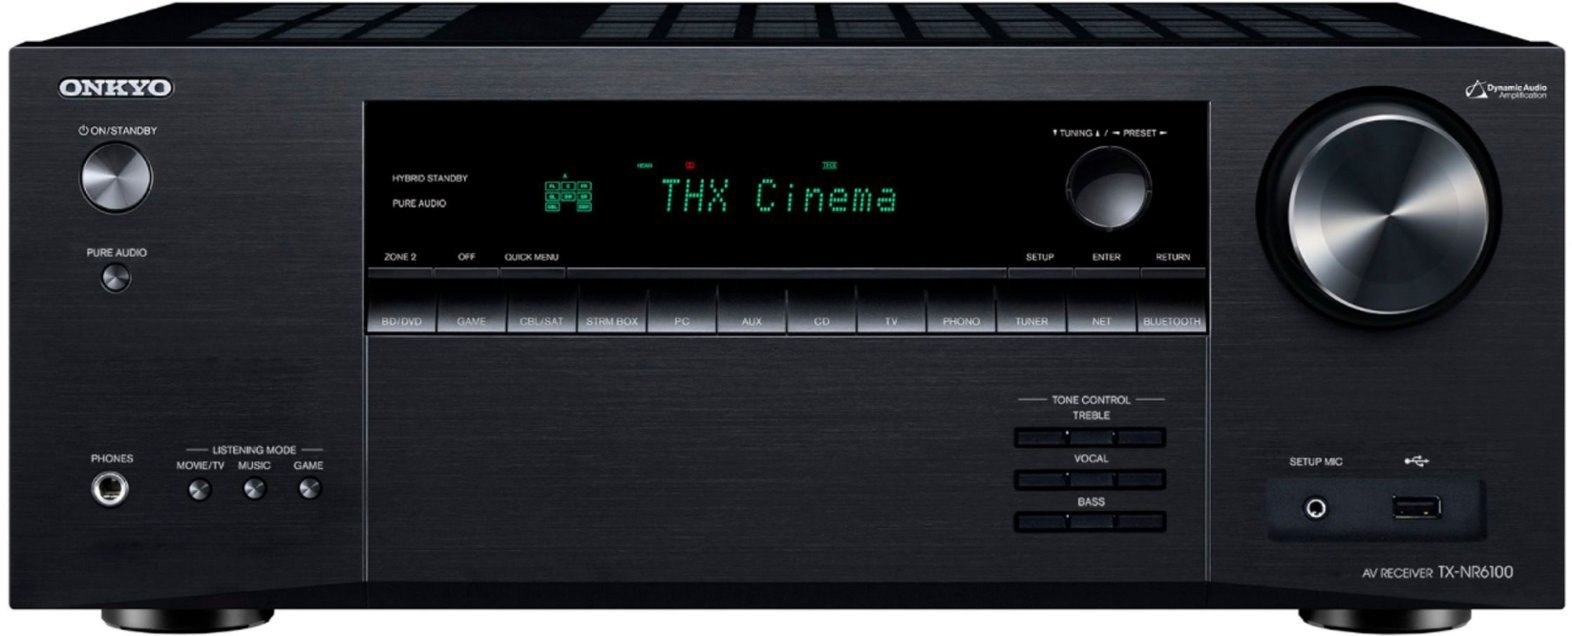 Onkyo - TX-NR6100 7.2 Channel THX Certified Network A/V Receiver - $474.99 + Free Shipping